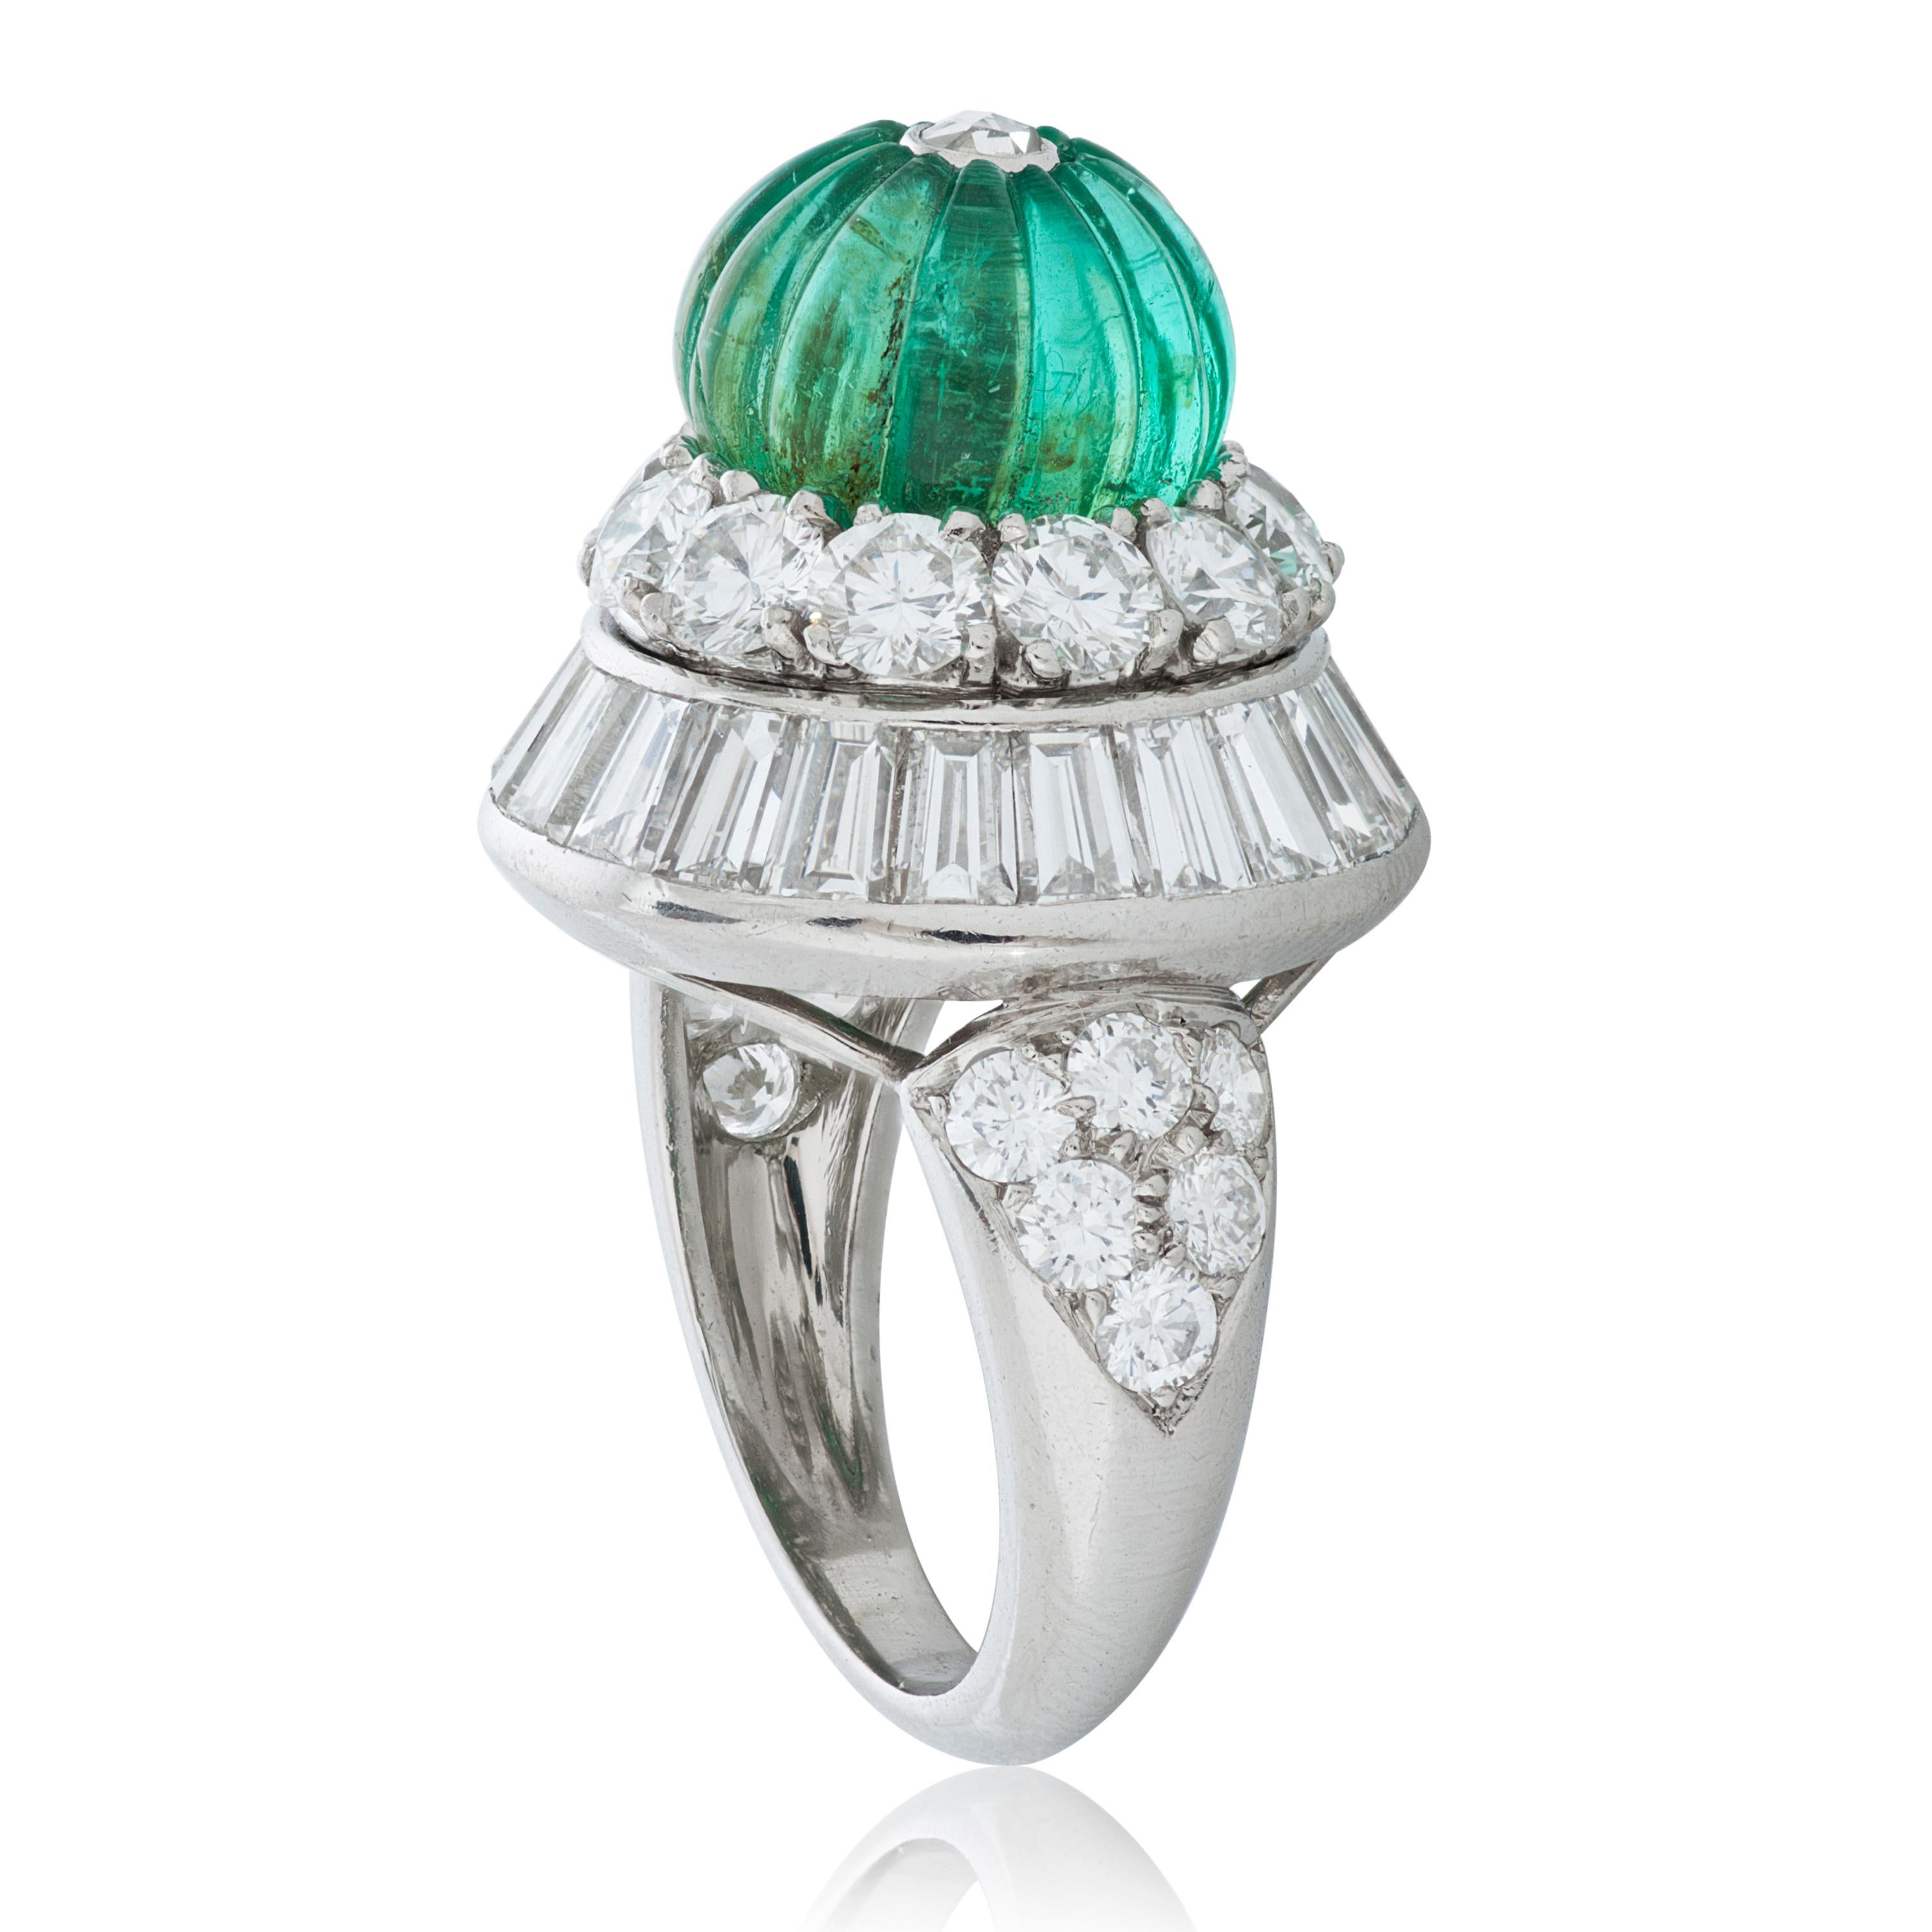 Vintage David Webb fluted emerald bead and diamond ring in platinum and 18k white gold, accompanied by David Webb certificate of authenticity and David Webb box.  

This David Webb ring features a 5.10 carat emerald bead carved in a fluted pattern. 